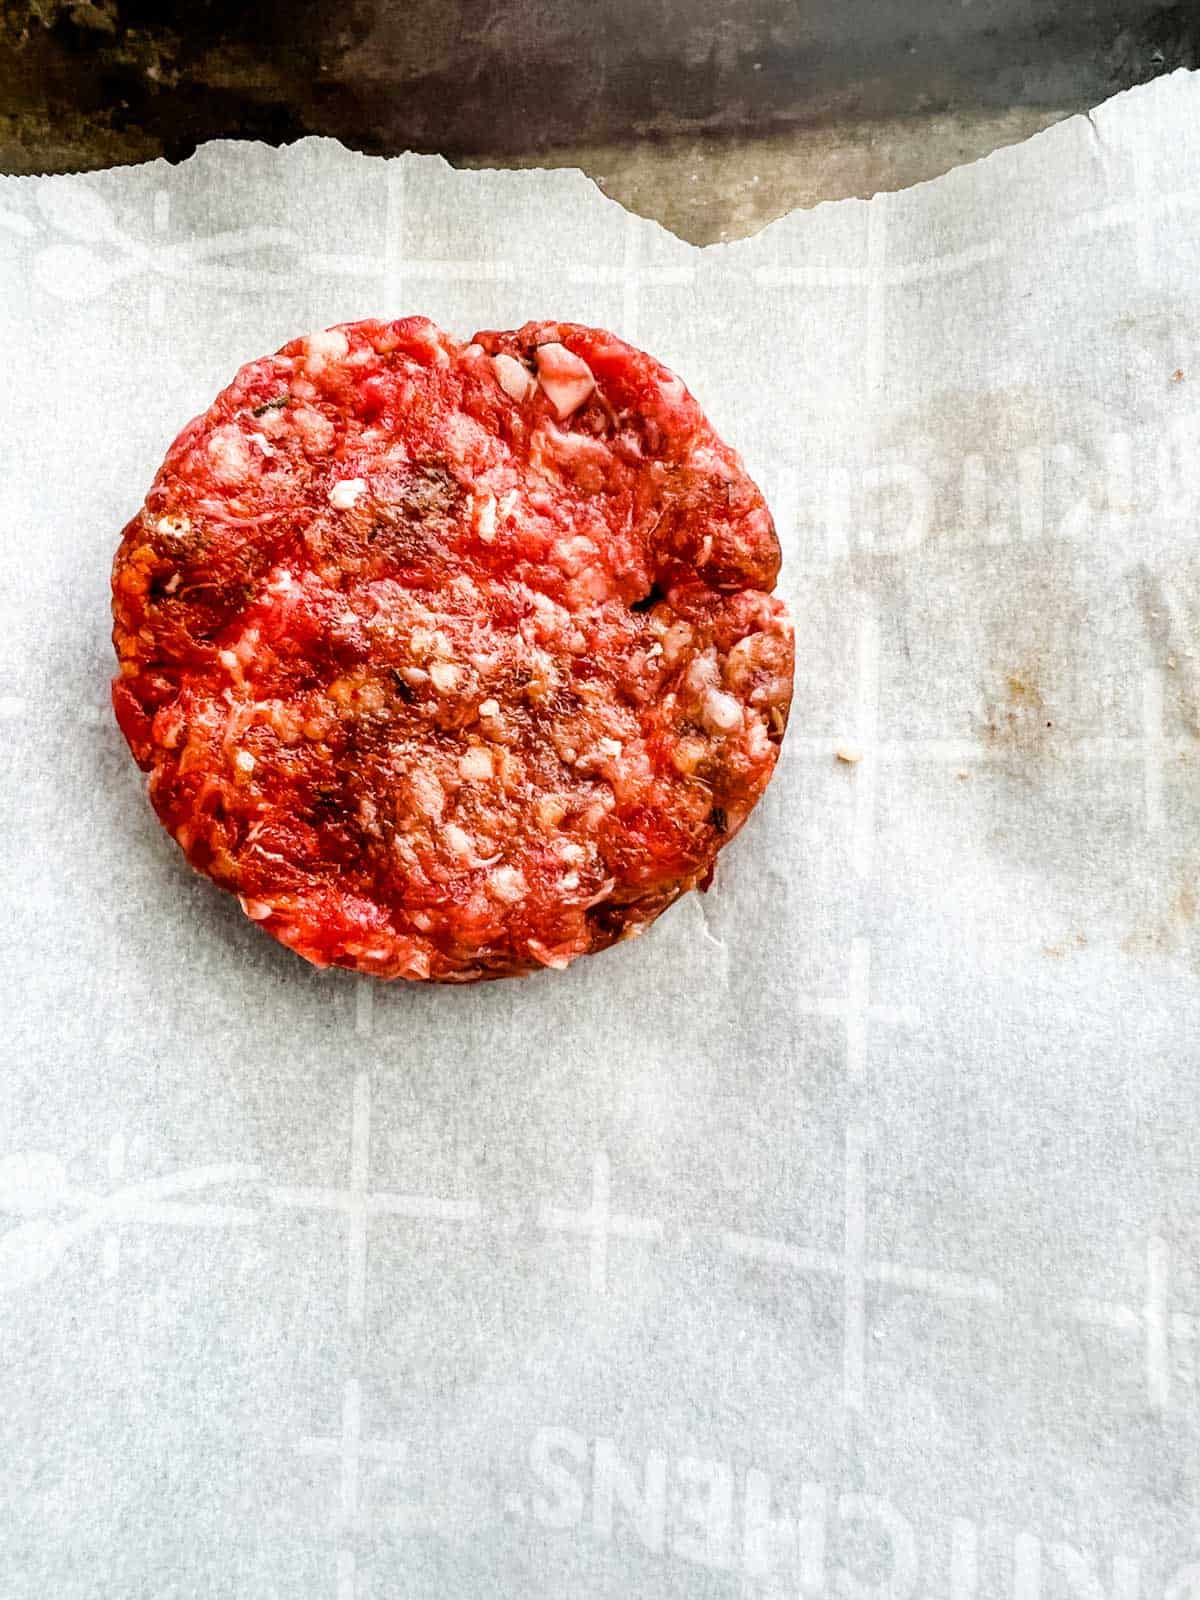 Close up photo of a formed sausage patty.